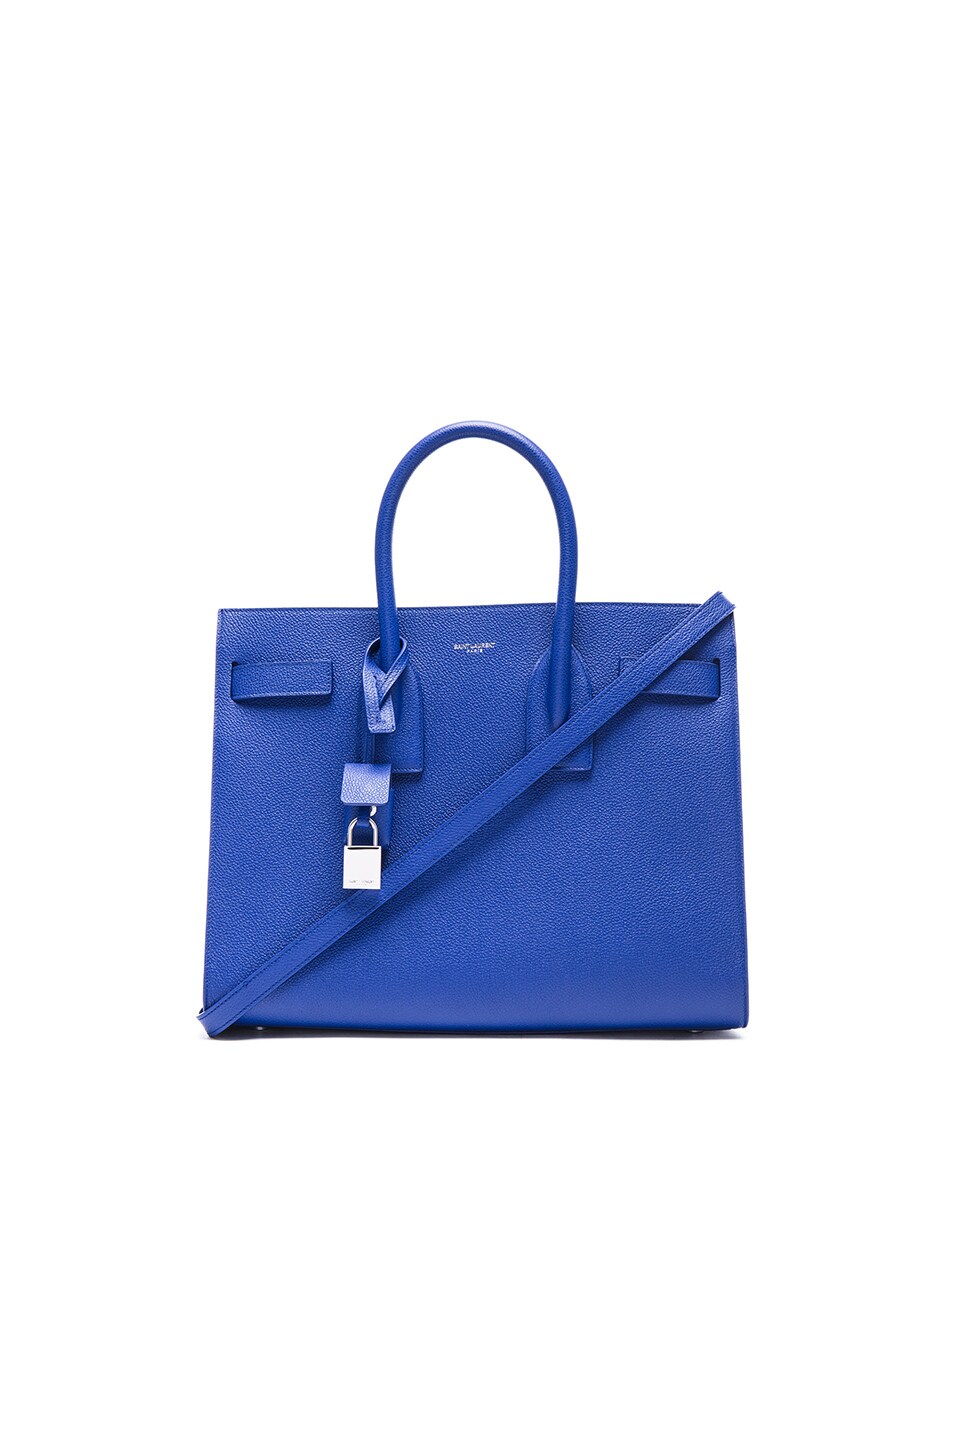 Image 1 of Saint Laurent Small Sac De Jour in Outremer